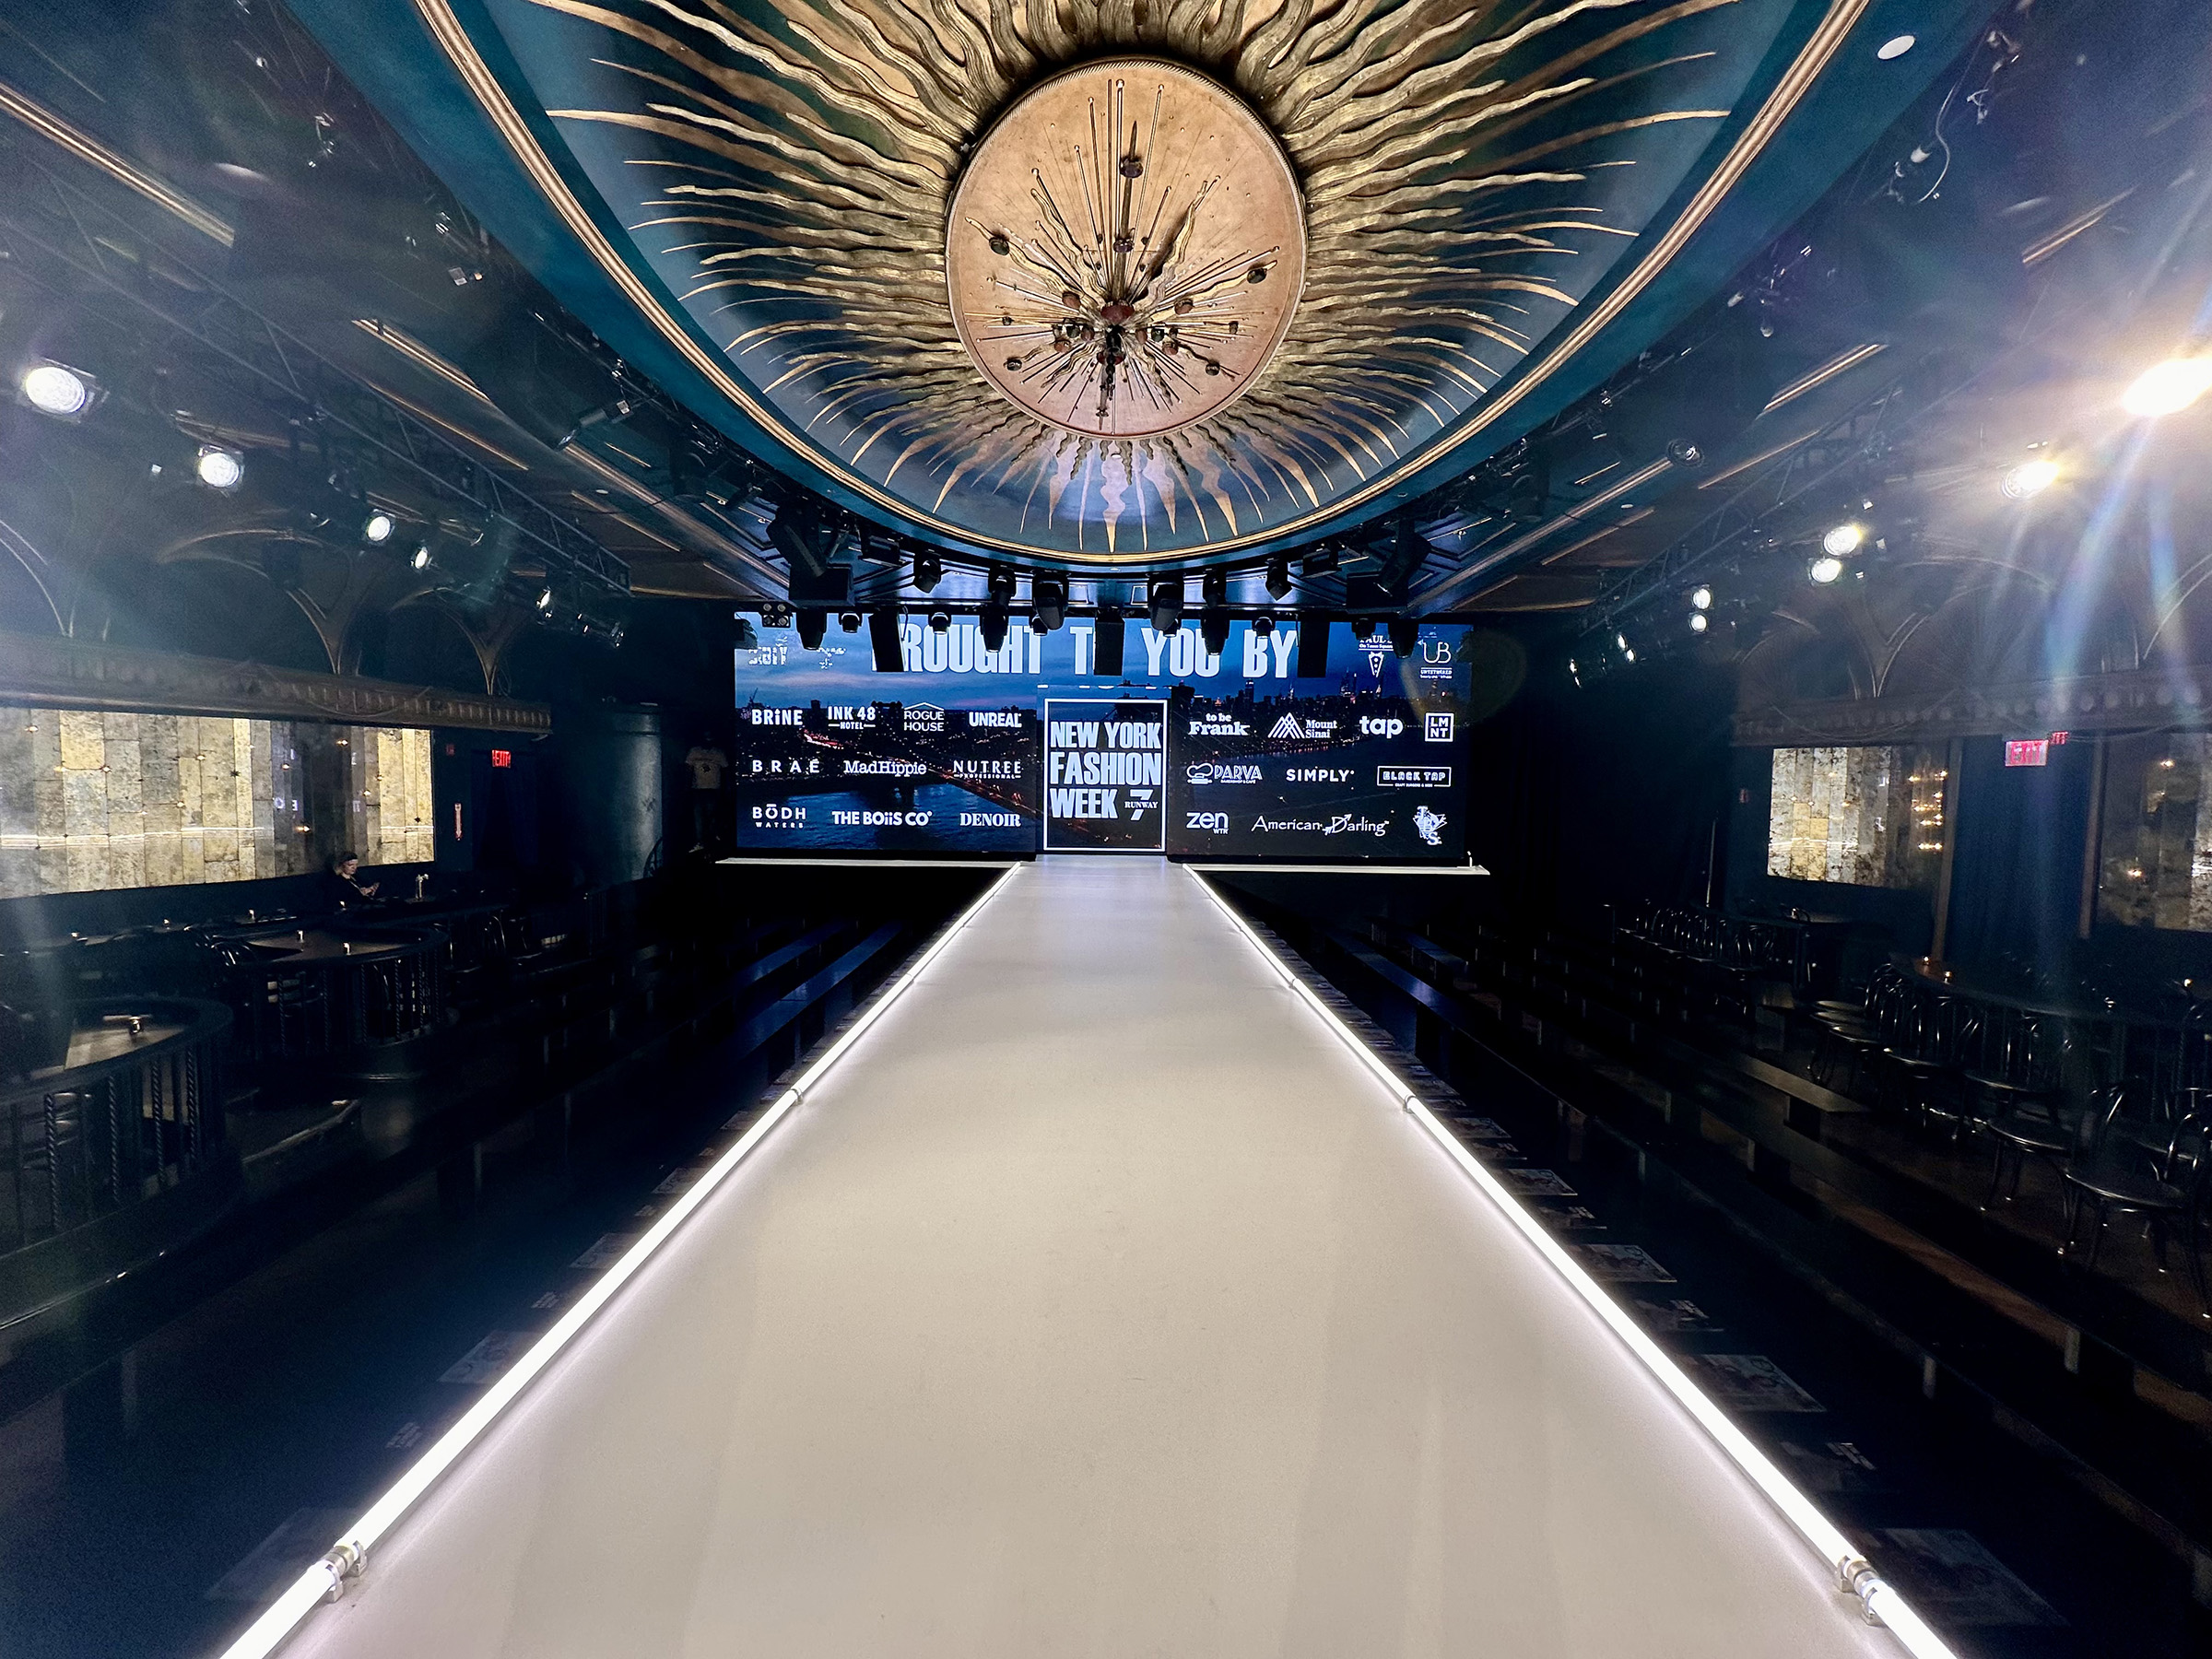 Myles Mangino sets the stage for Runway 7 during New York Fashion Week with CHAUVET Professional